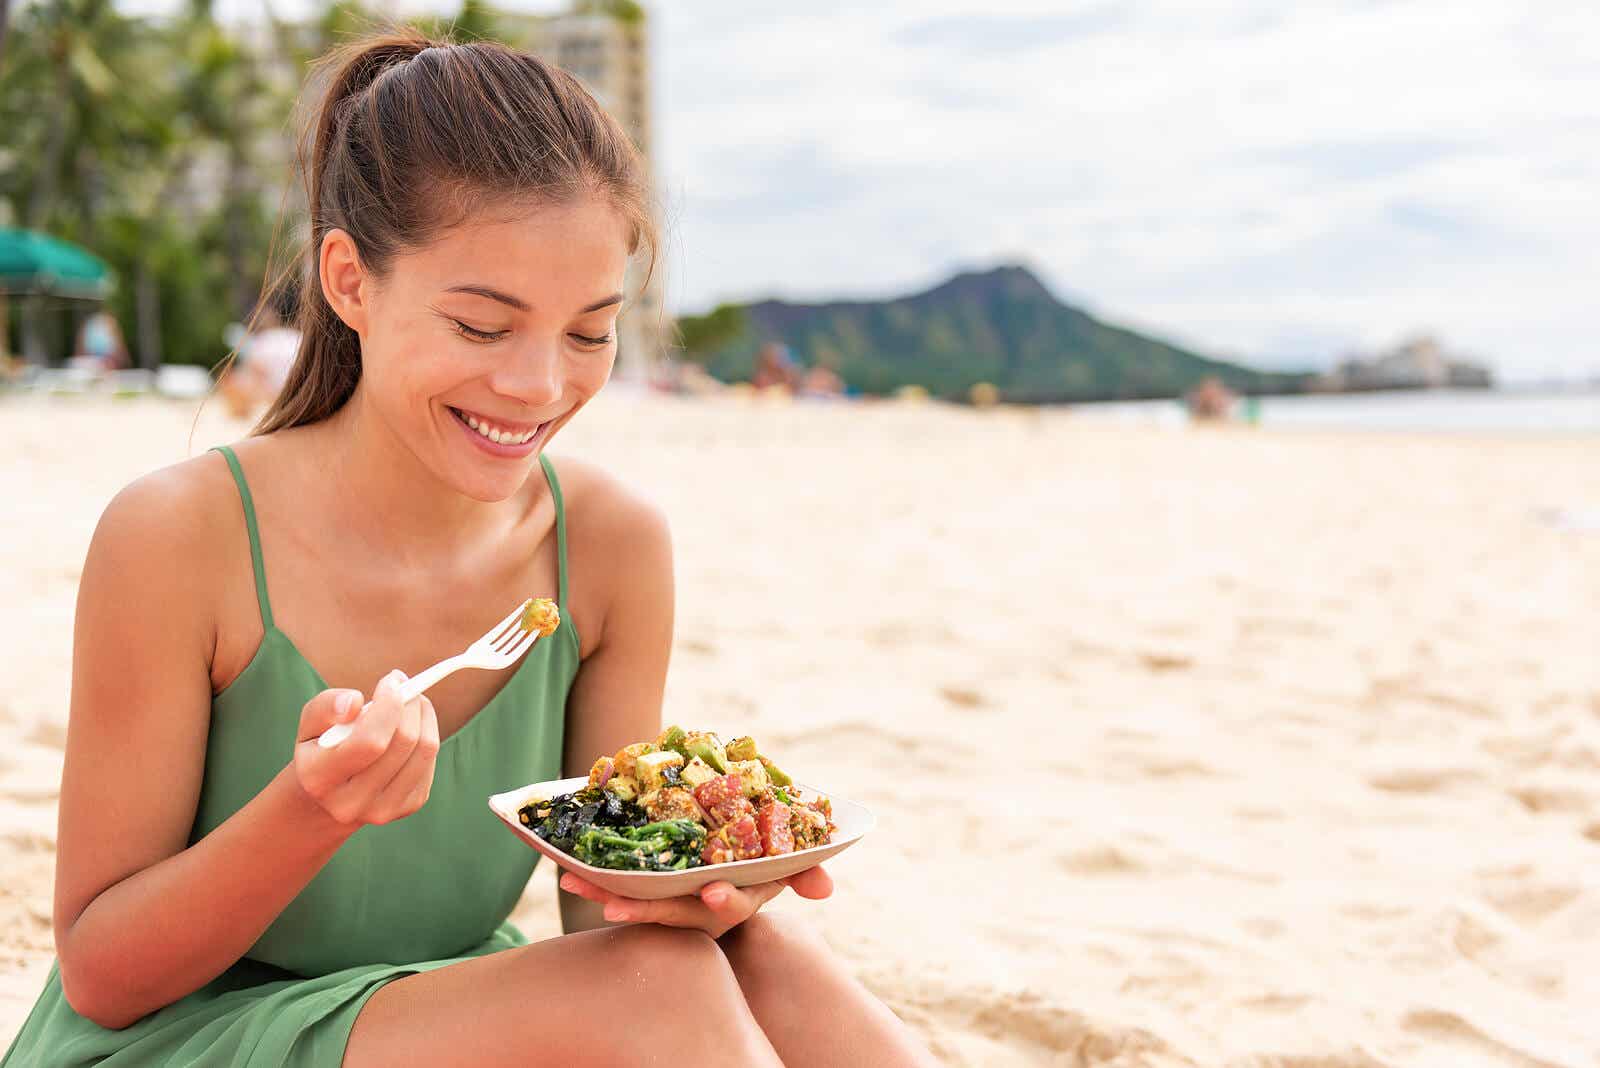 Woman eating at the beach healthy food prepared at home to avoid food poisoning.